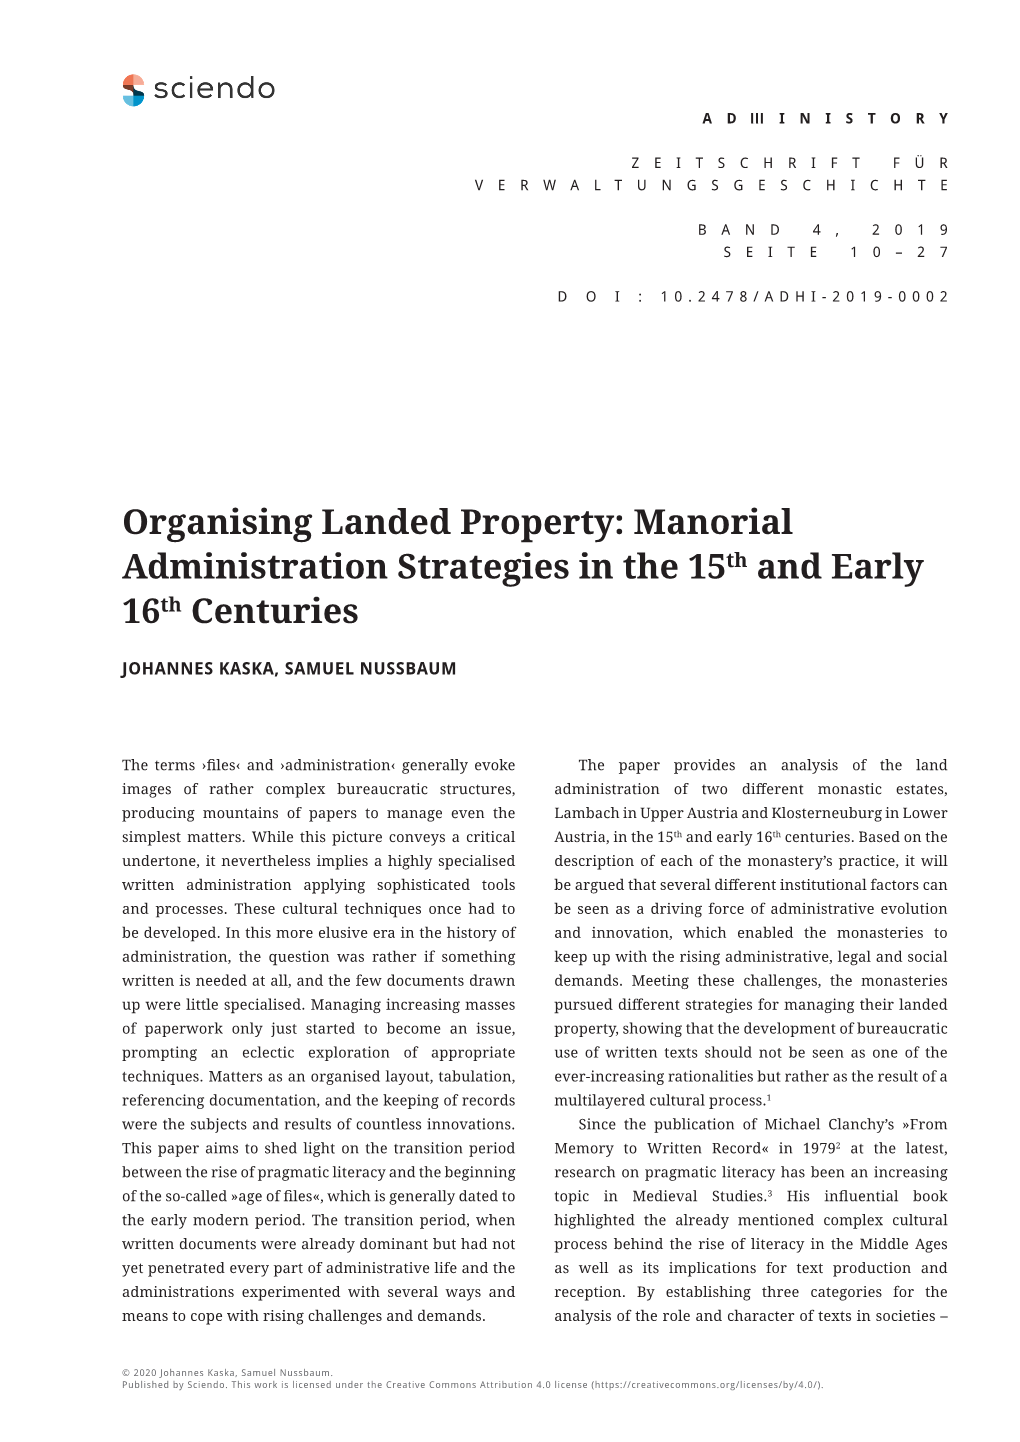 Organising Landed Property: Manorial Administration Strategies in the 15Th and Early 16Th Centuries